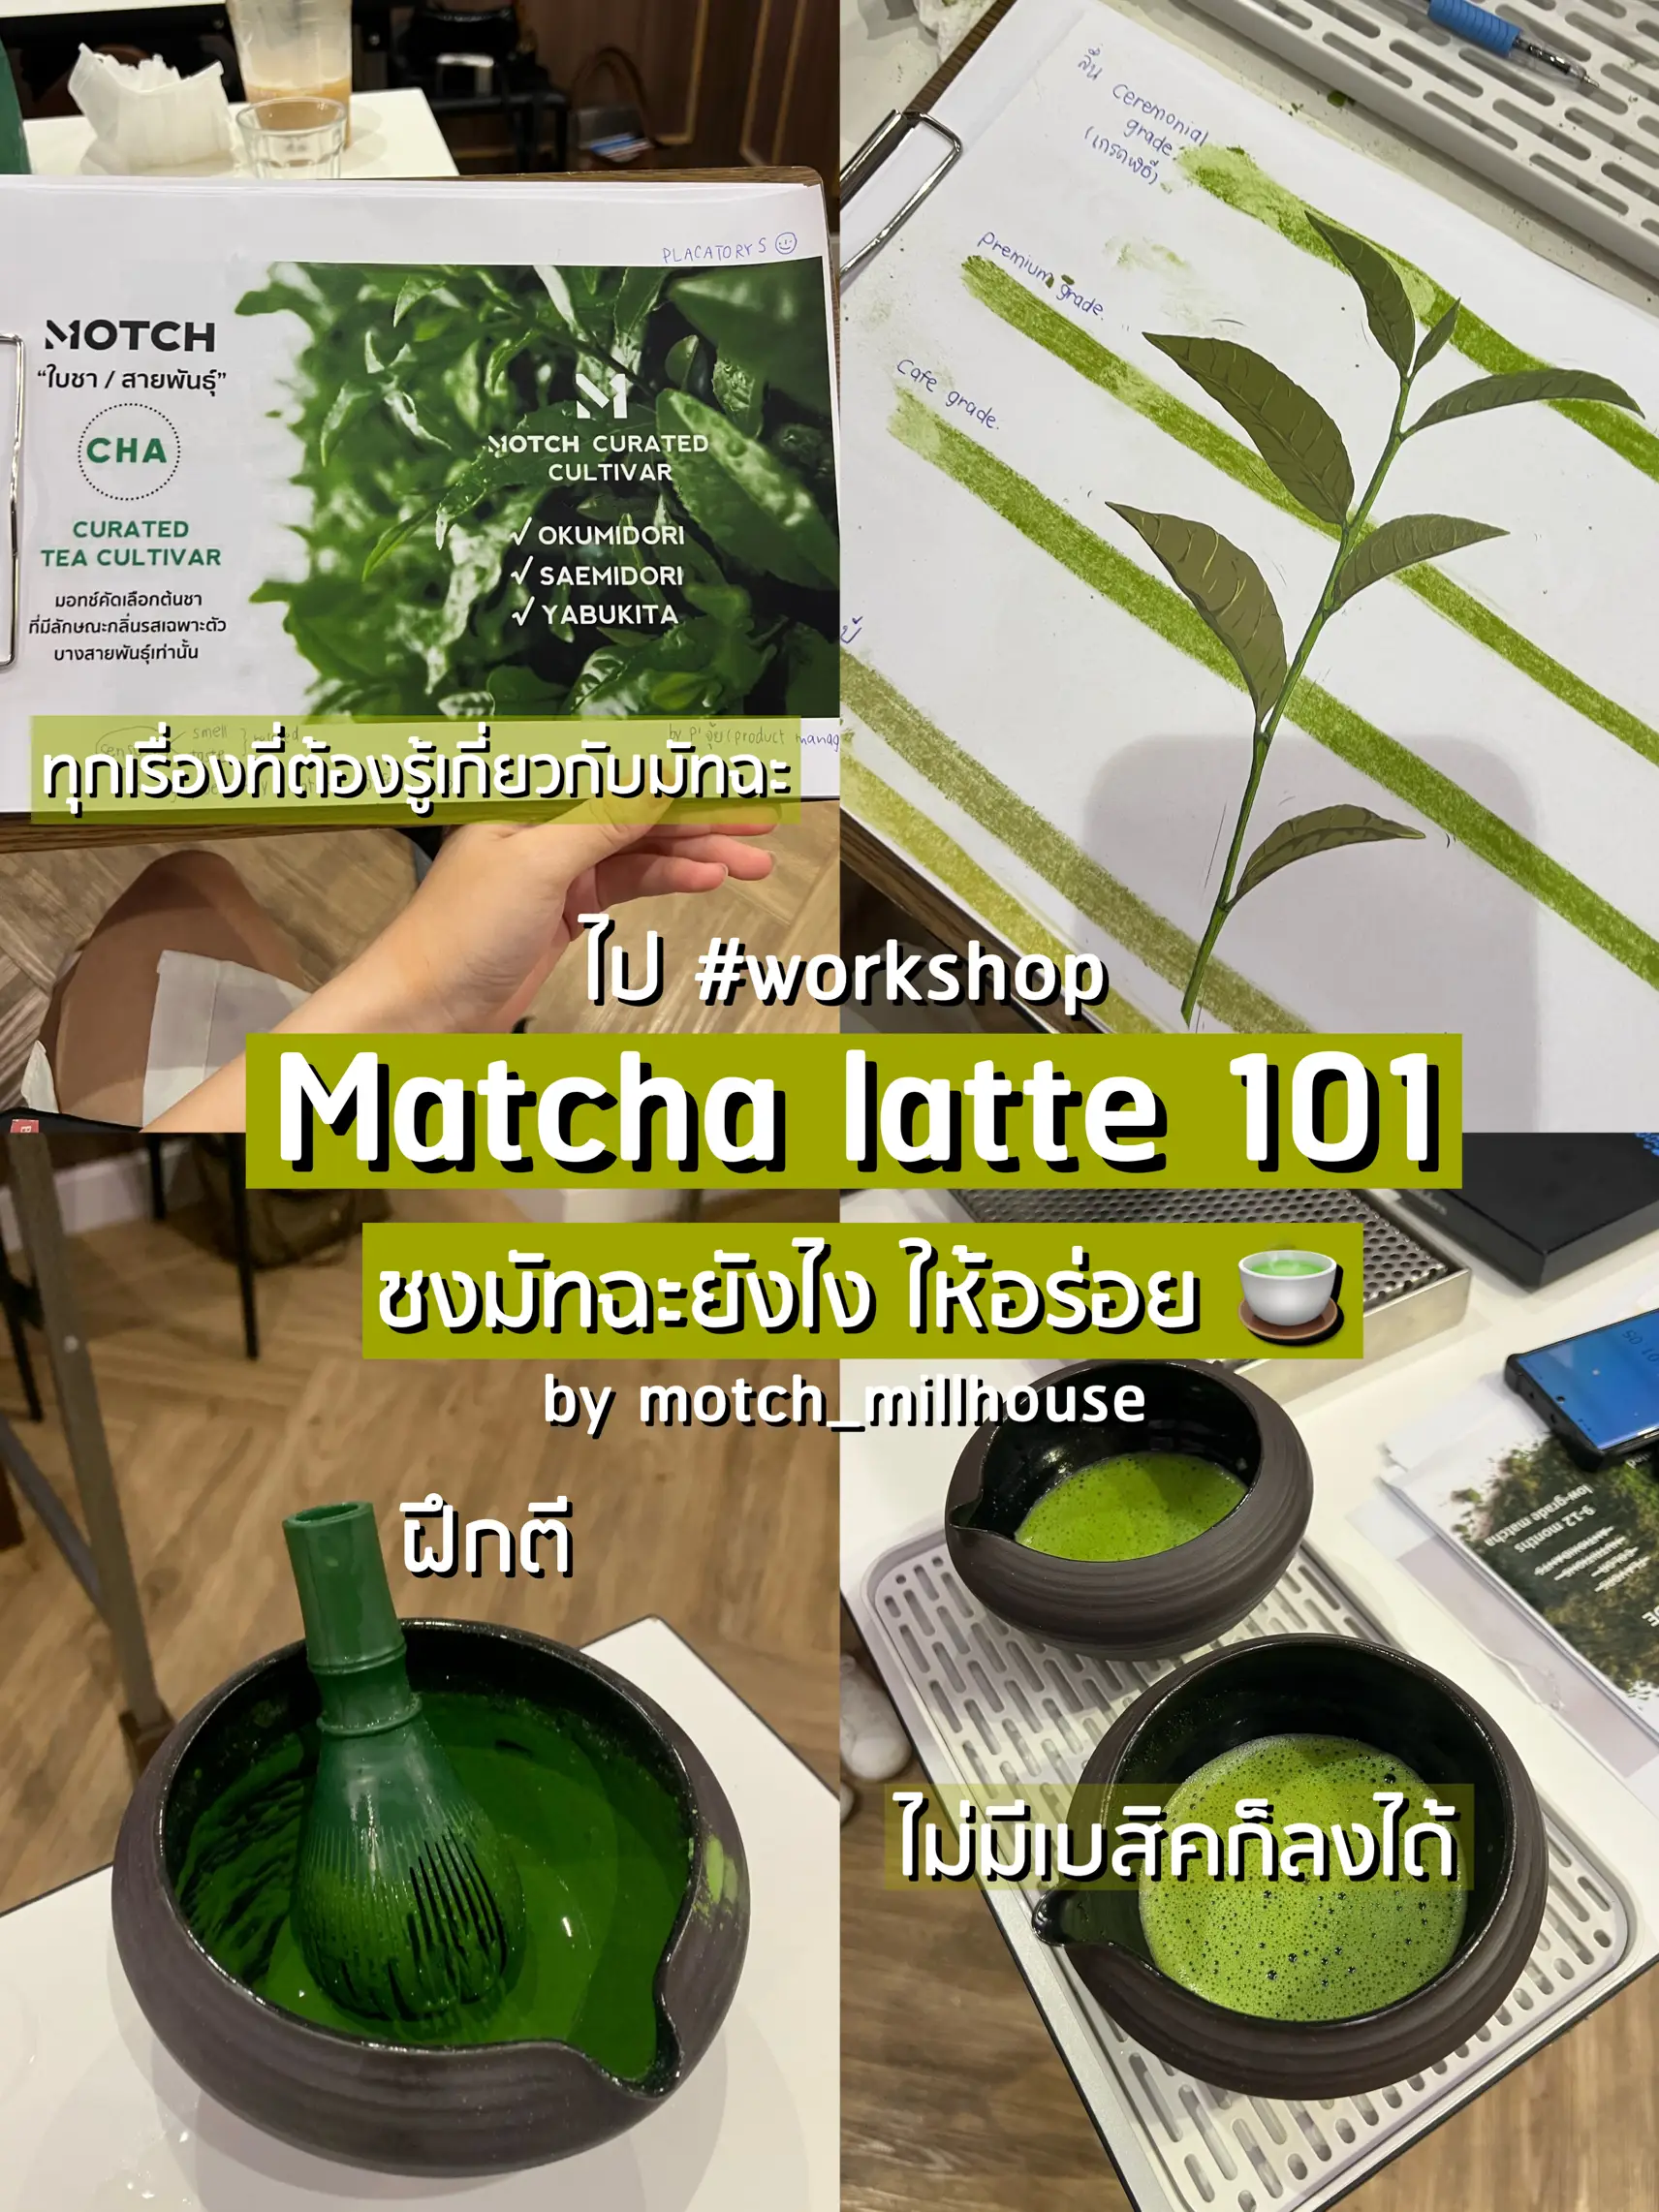 Let's go to the # matchalatte 101 workshop., Gallery posted by HDWM